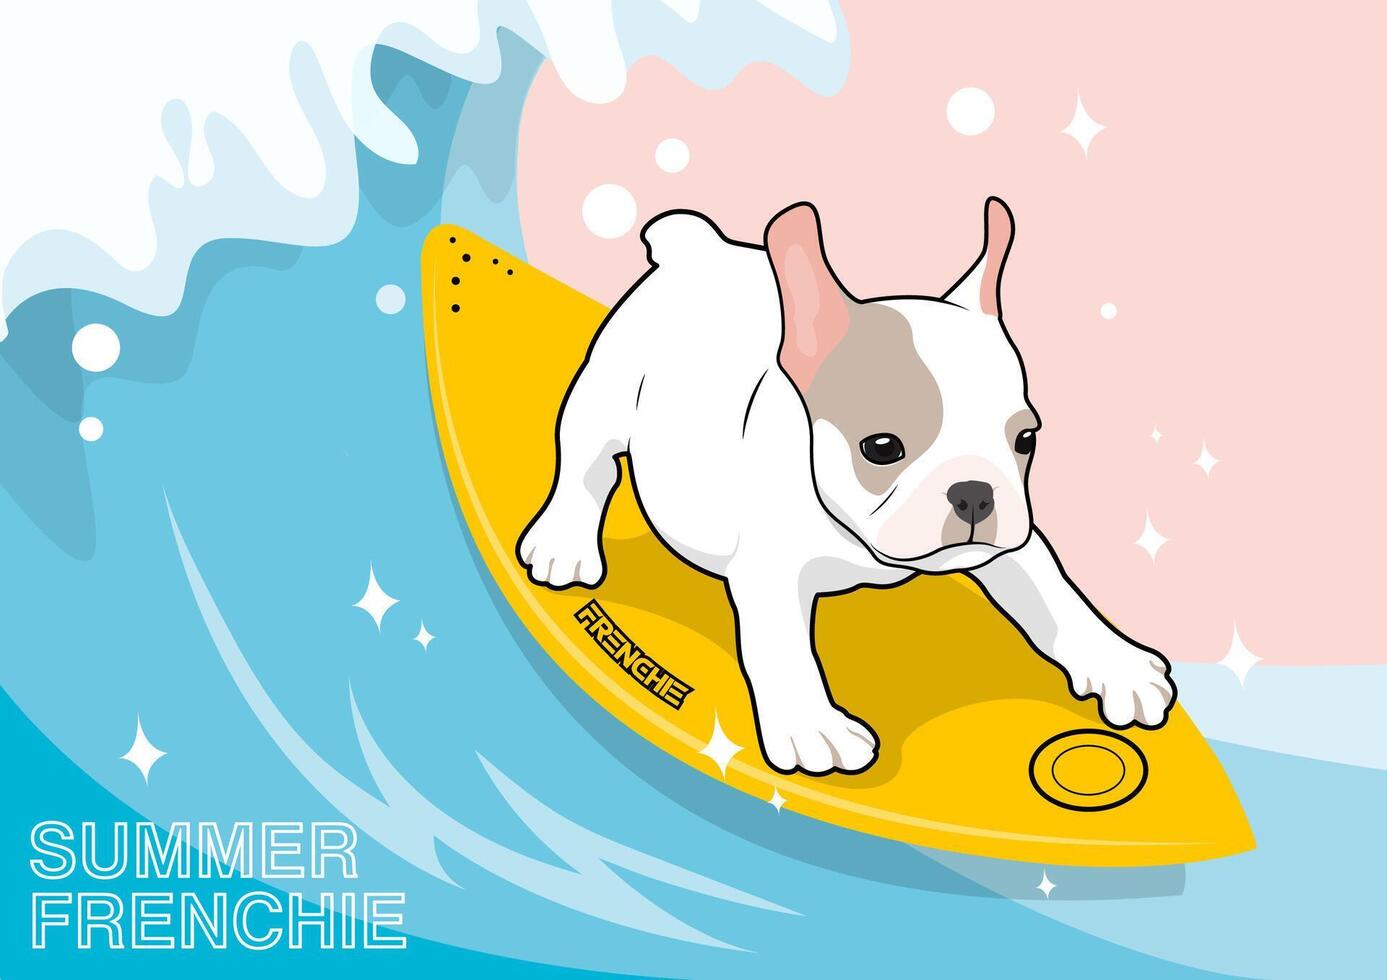 Cute Frenchie and His Surfboard in The Summer Scene vector